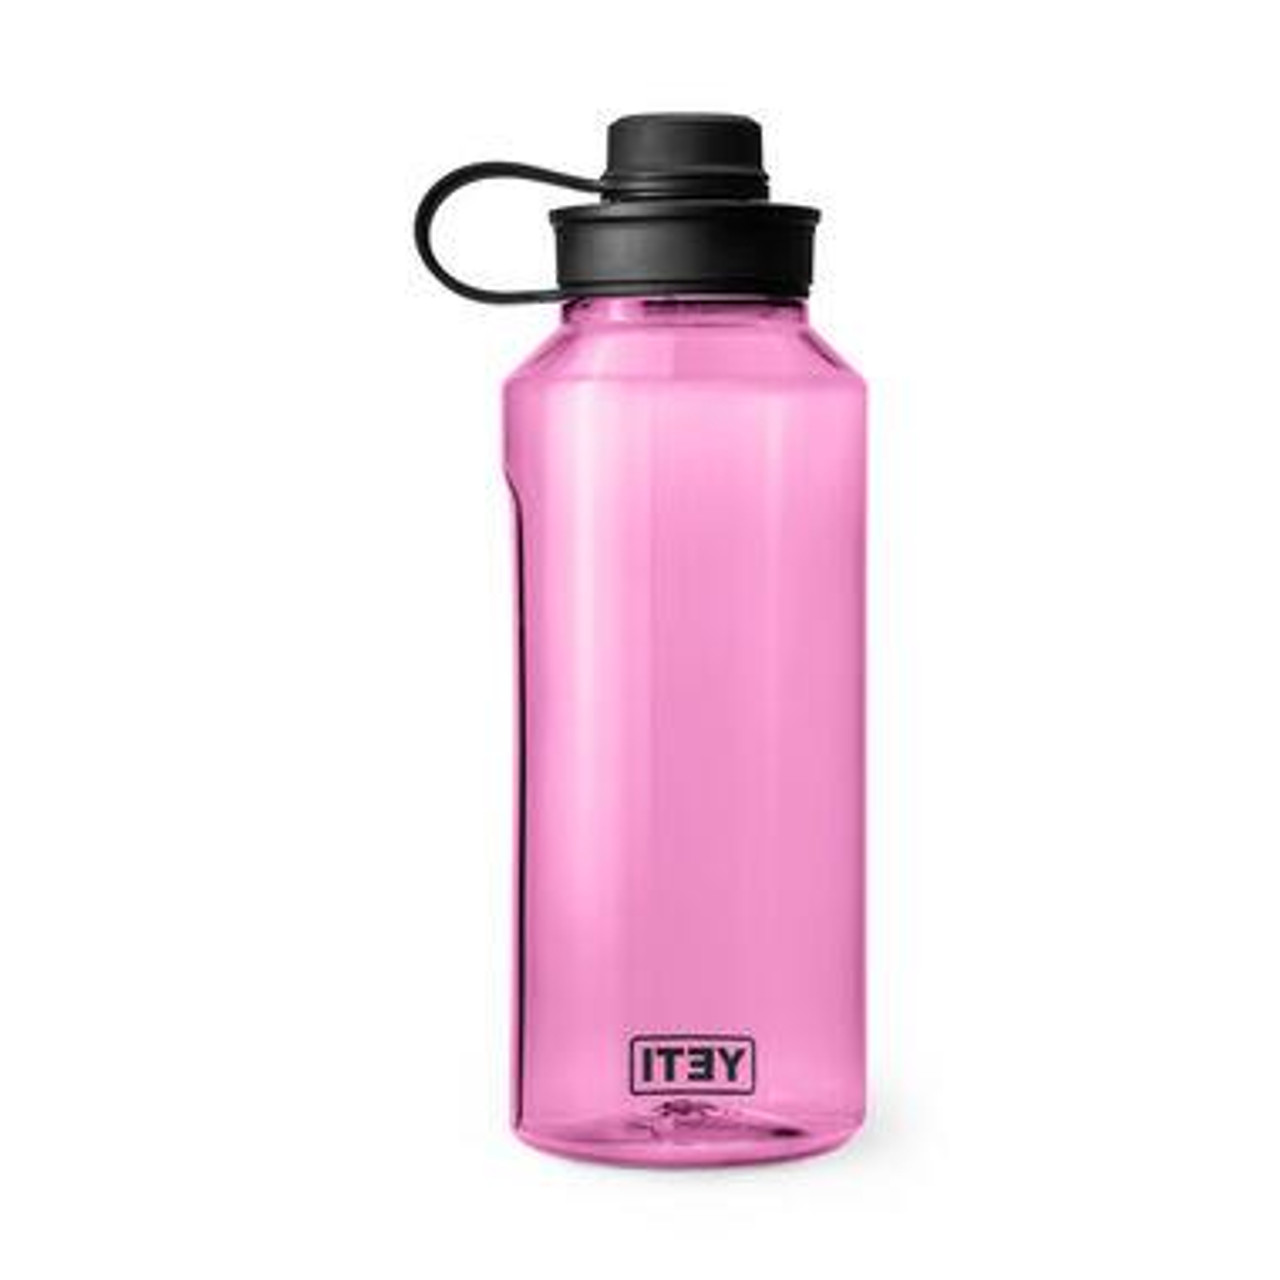 https://cdn11.bigcommerce.com/s-d4f5hm3/images/stencil/1280x1280/products/66578/161492/Yeti-Yonder-1-5L-50oz-Water-Bottle-Pink-With-Chug-Cap-888830323014_image2__35419.1699295730.jpg?c=2